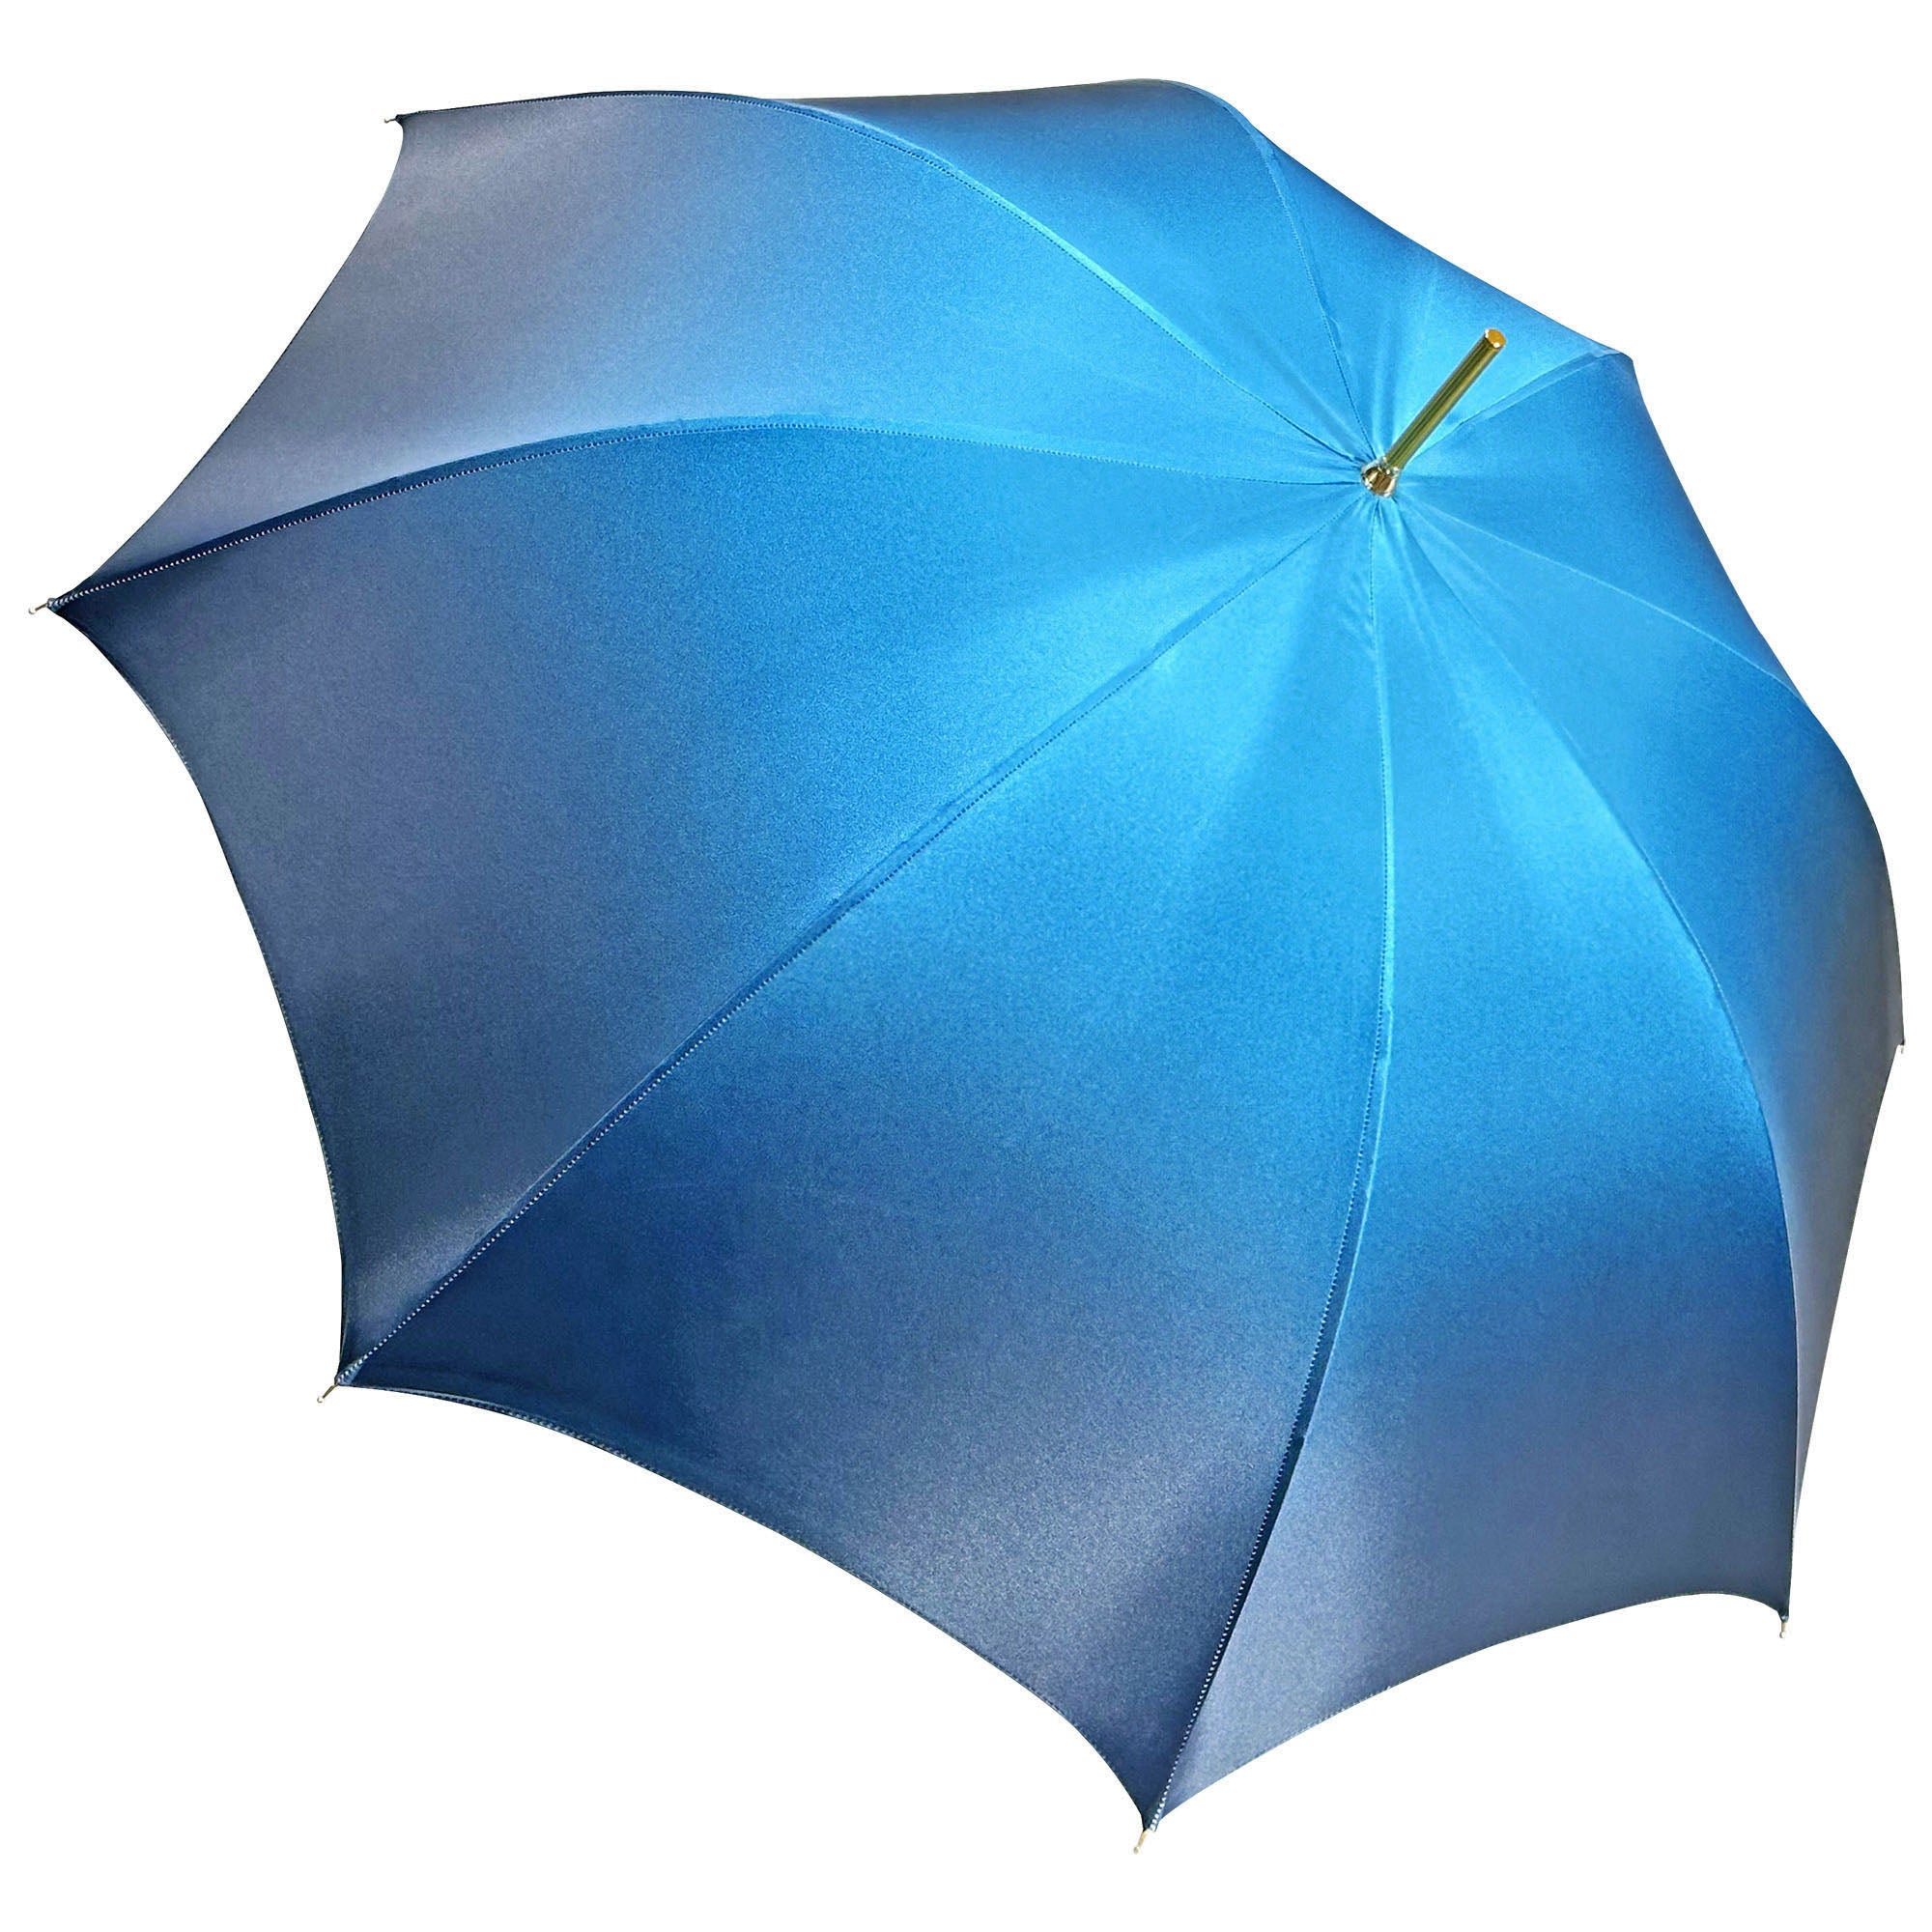 Beautiful Double Canopy Umbrella with butterfly design